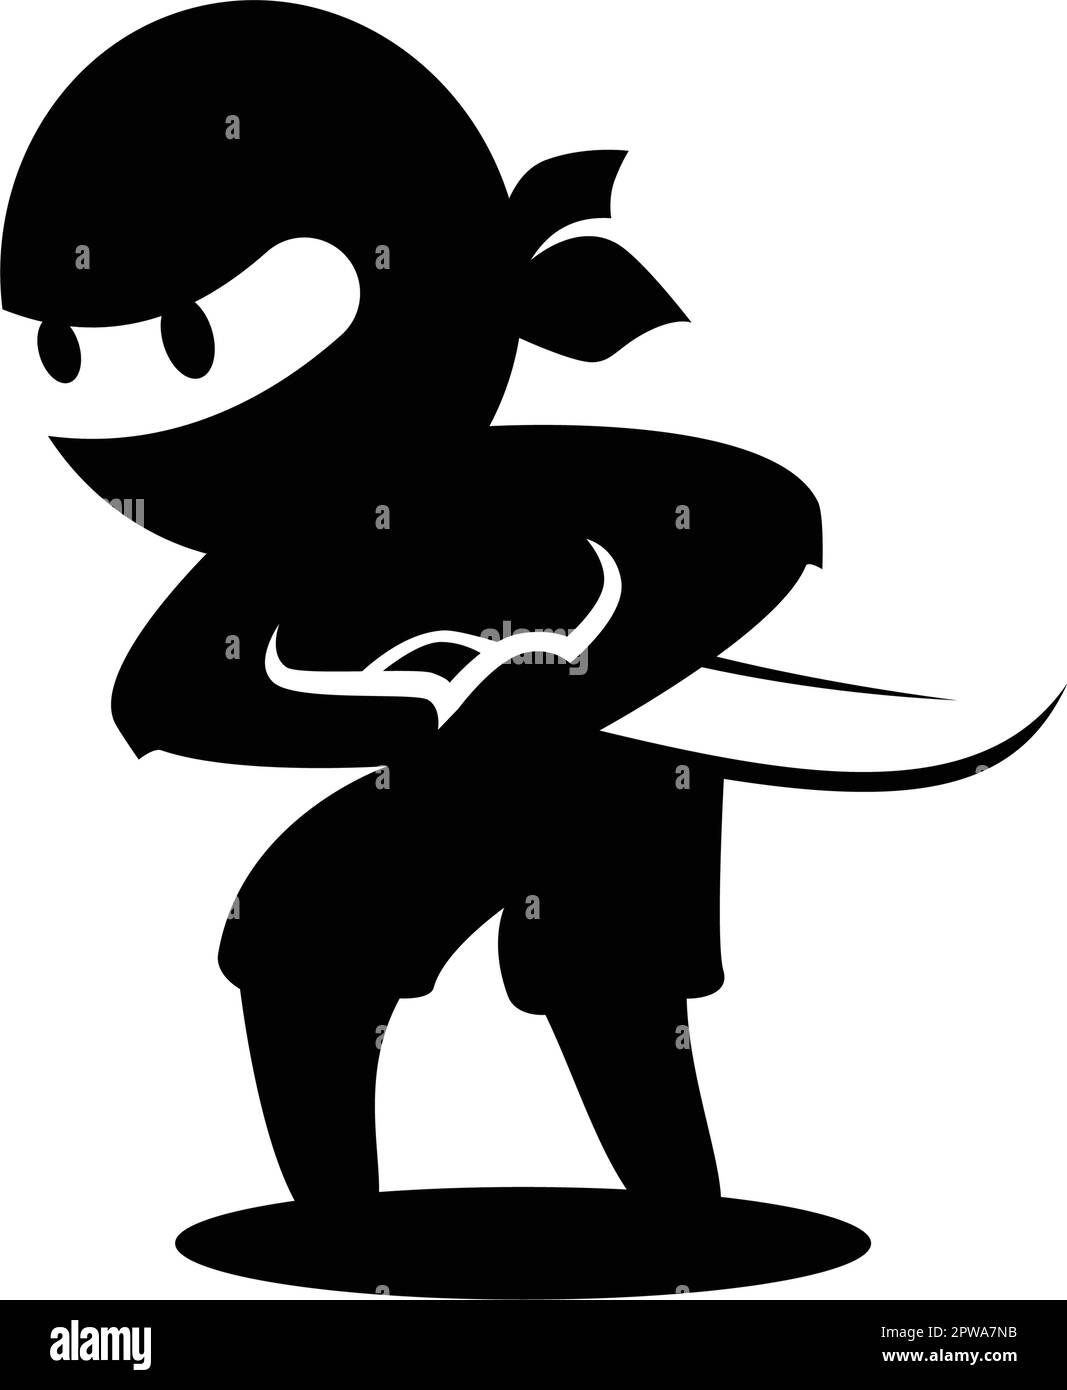 Ninja Holding His Knife Illustration with Silhouette Style Stock Vector